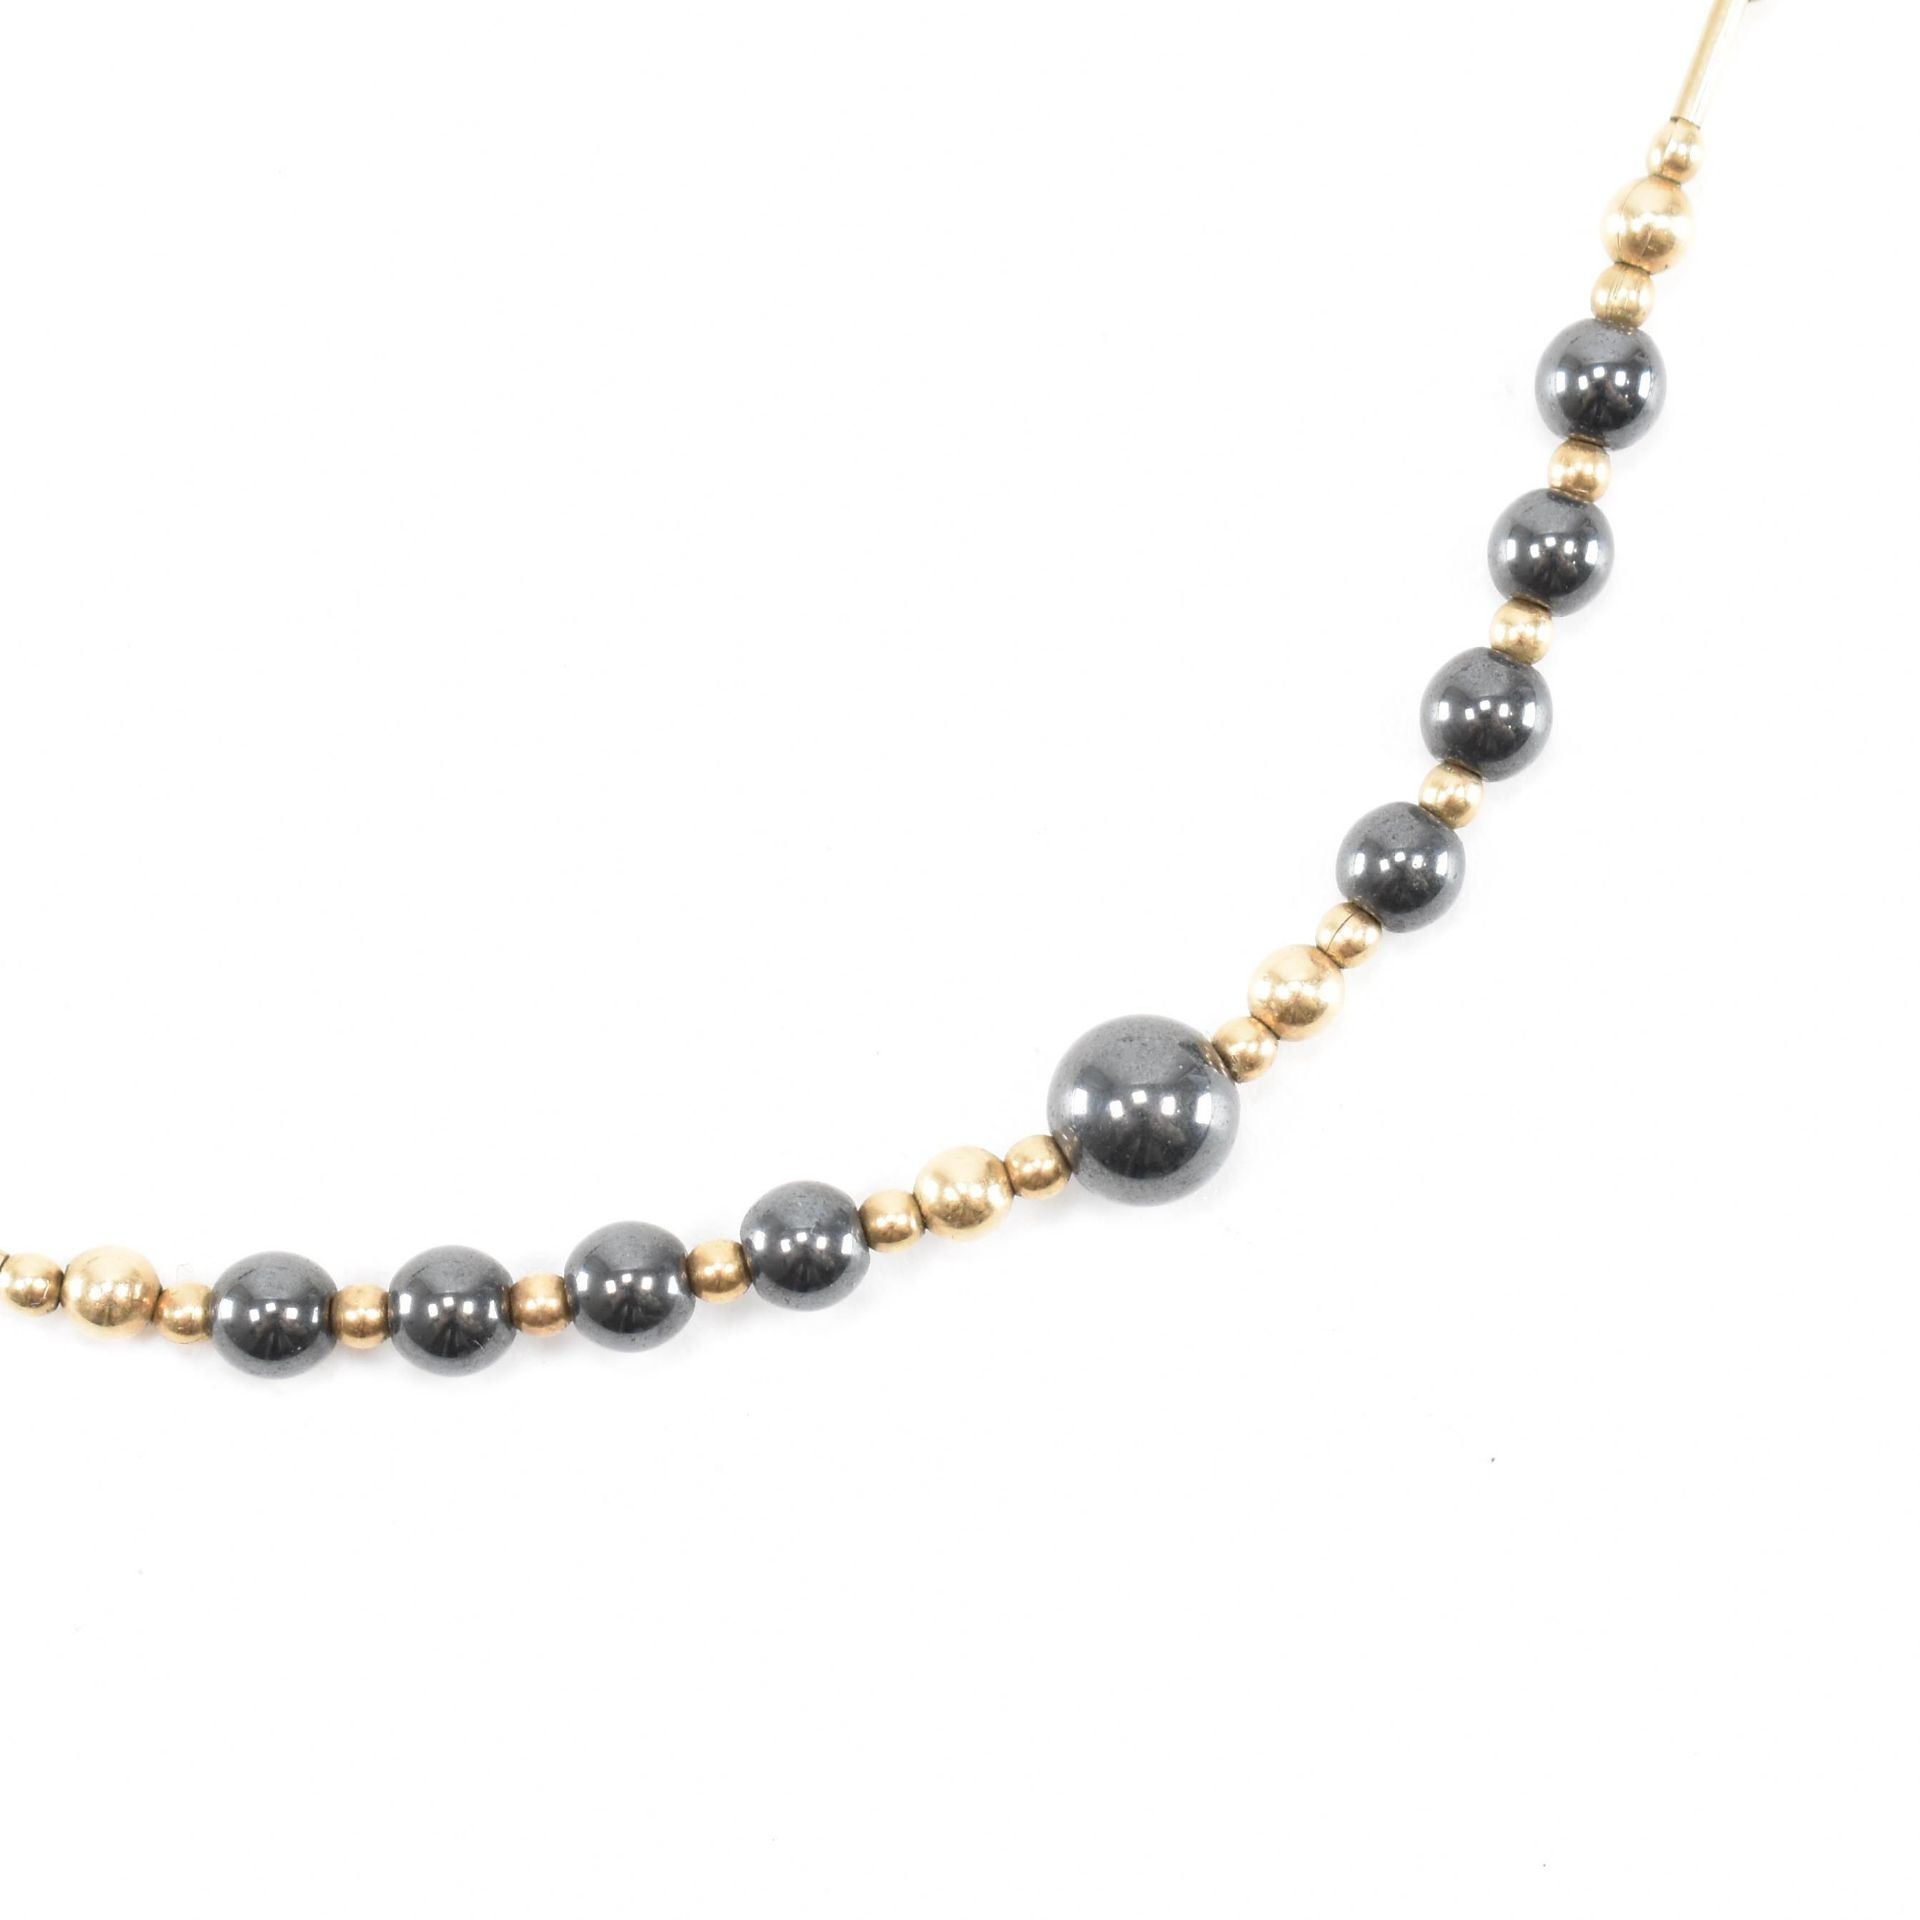 VINTAGE 14CT GOLD & HEMATITE BEADED NECKLACE - Image 3 of 4